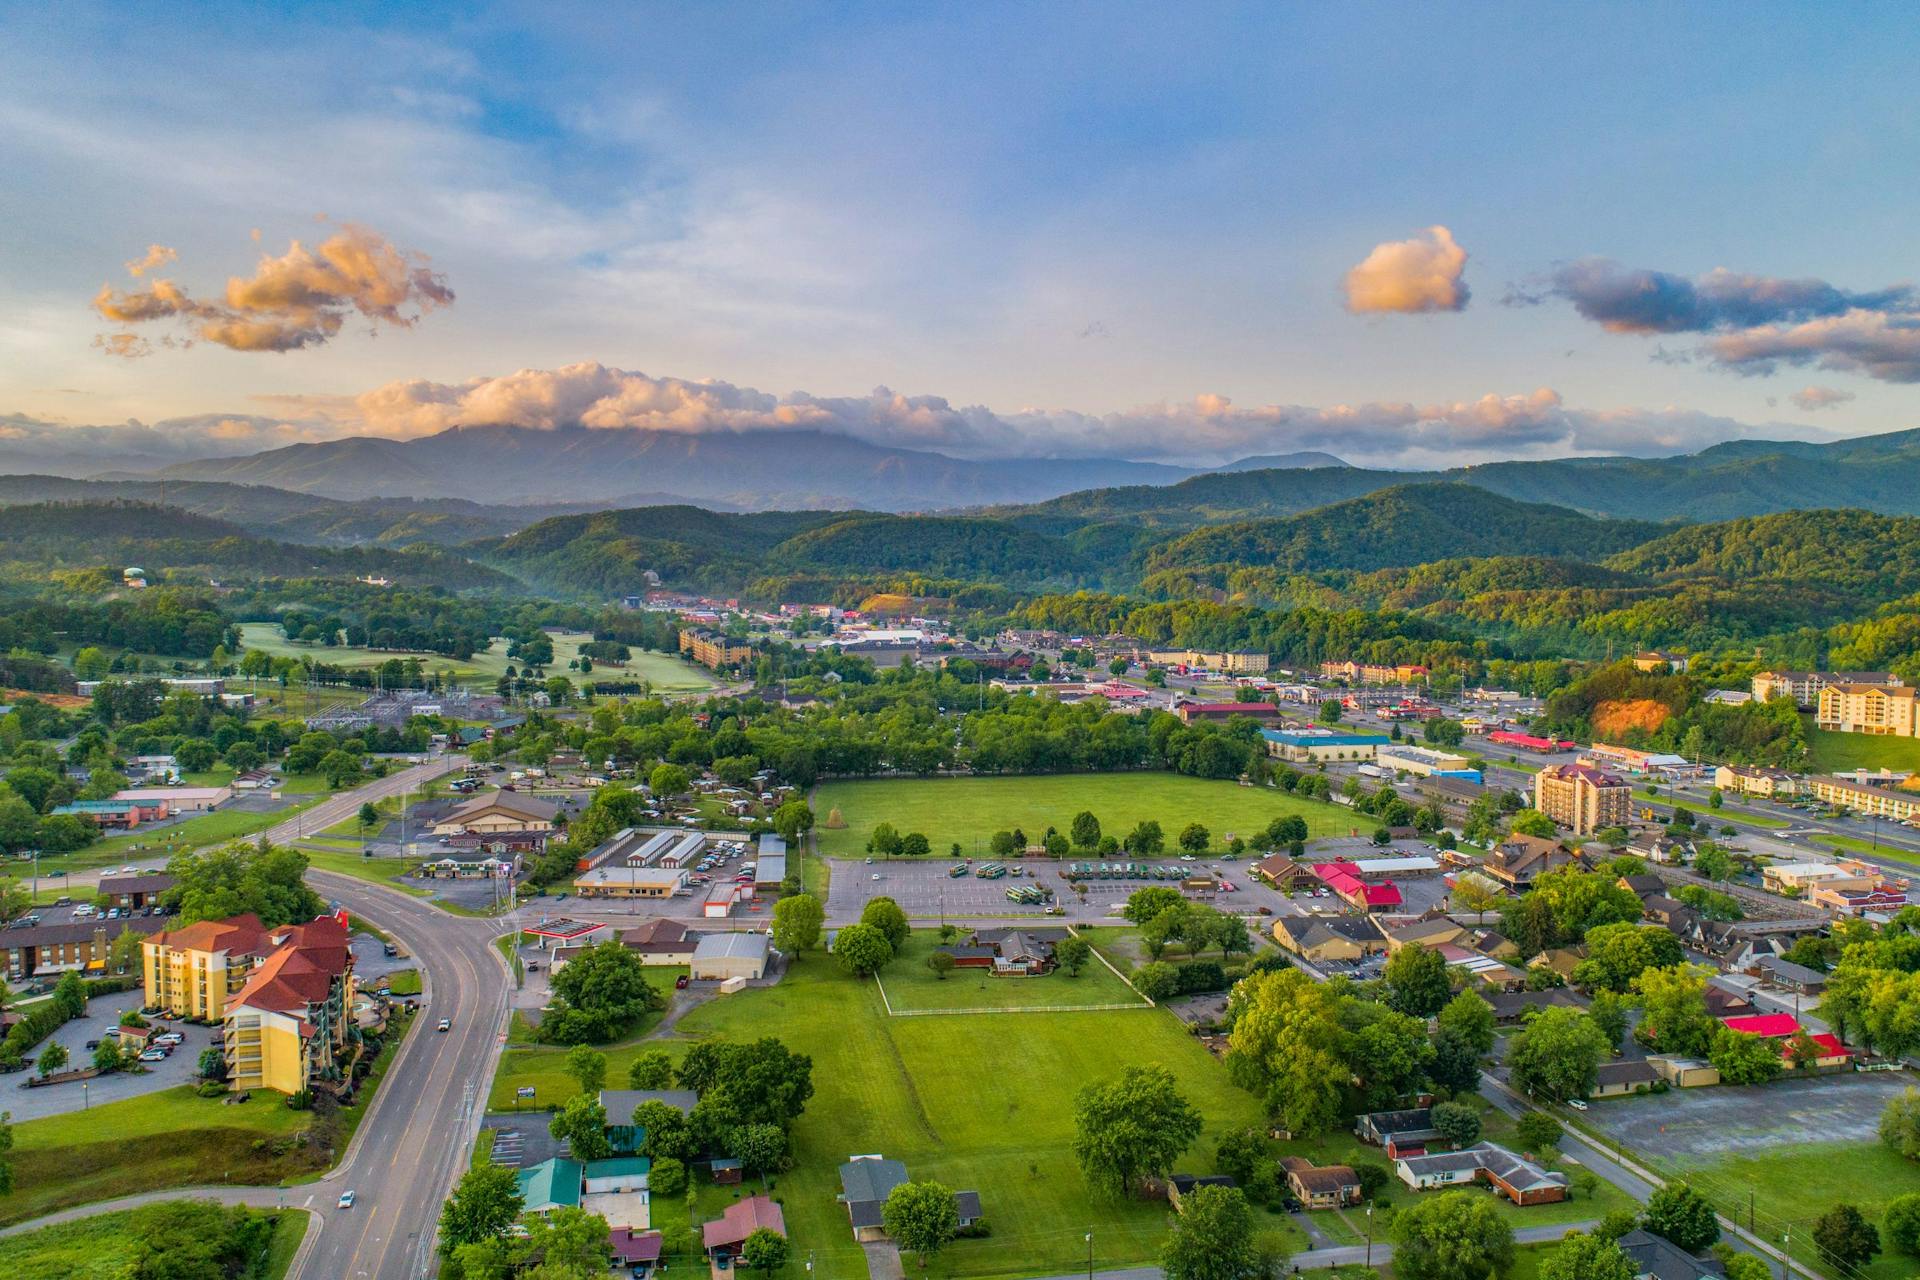 The Ultimate 5-Day Pigeon Forge Itinerary for a Family Road Trip